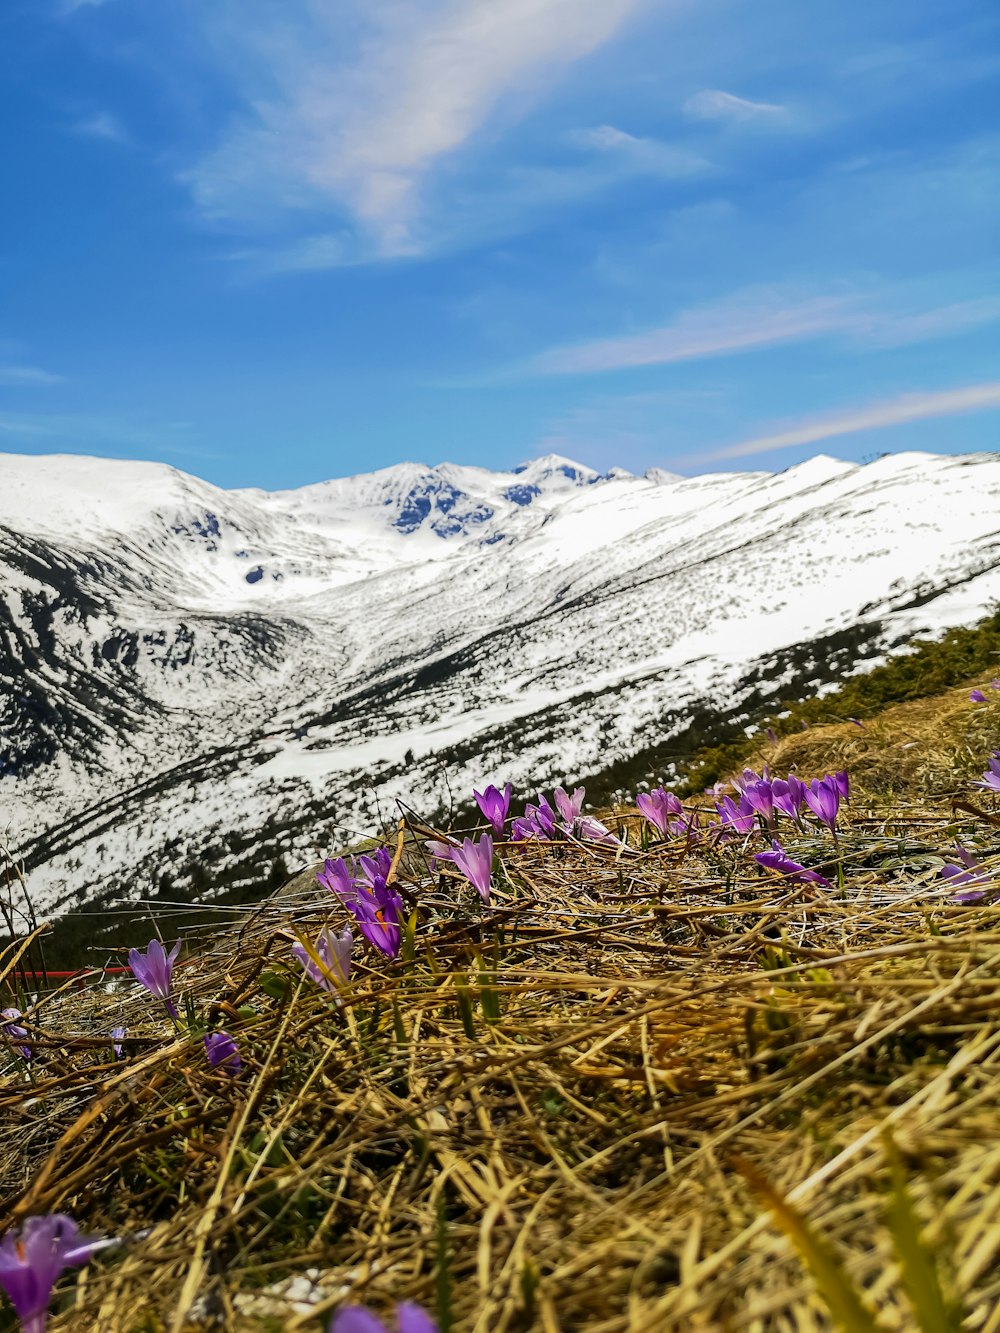 purple flower on green grass field near snow covered mountain during daytime